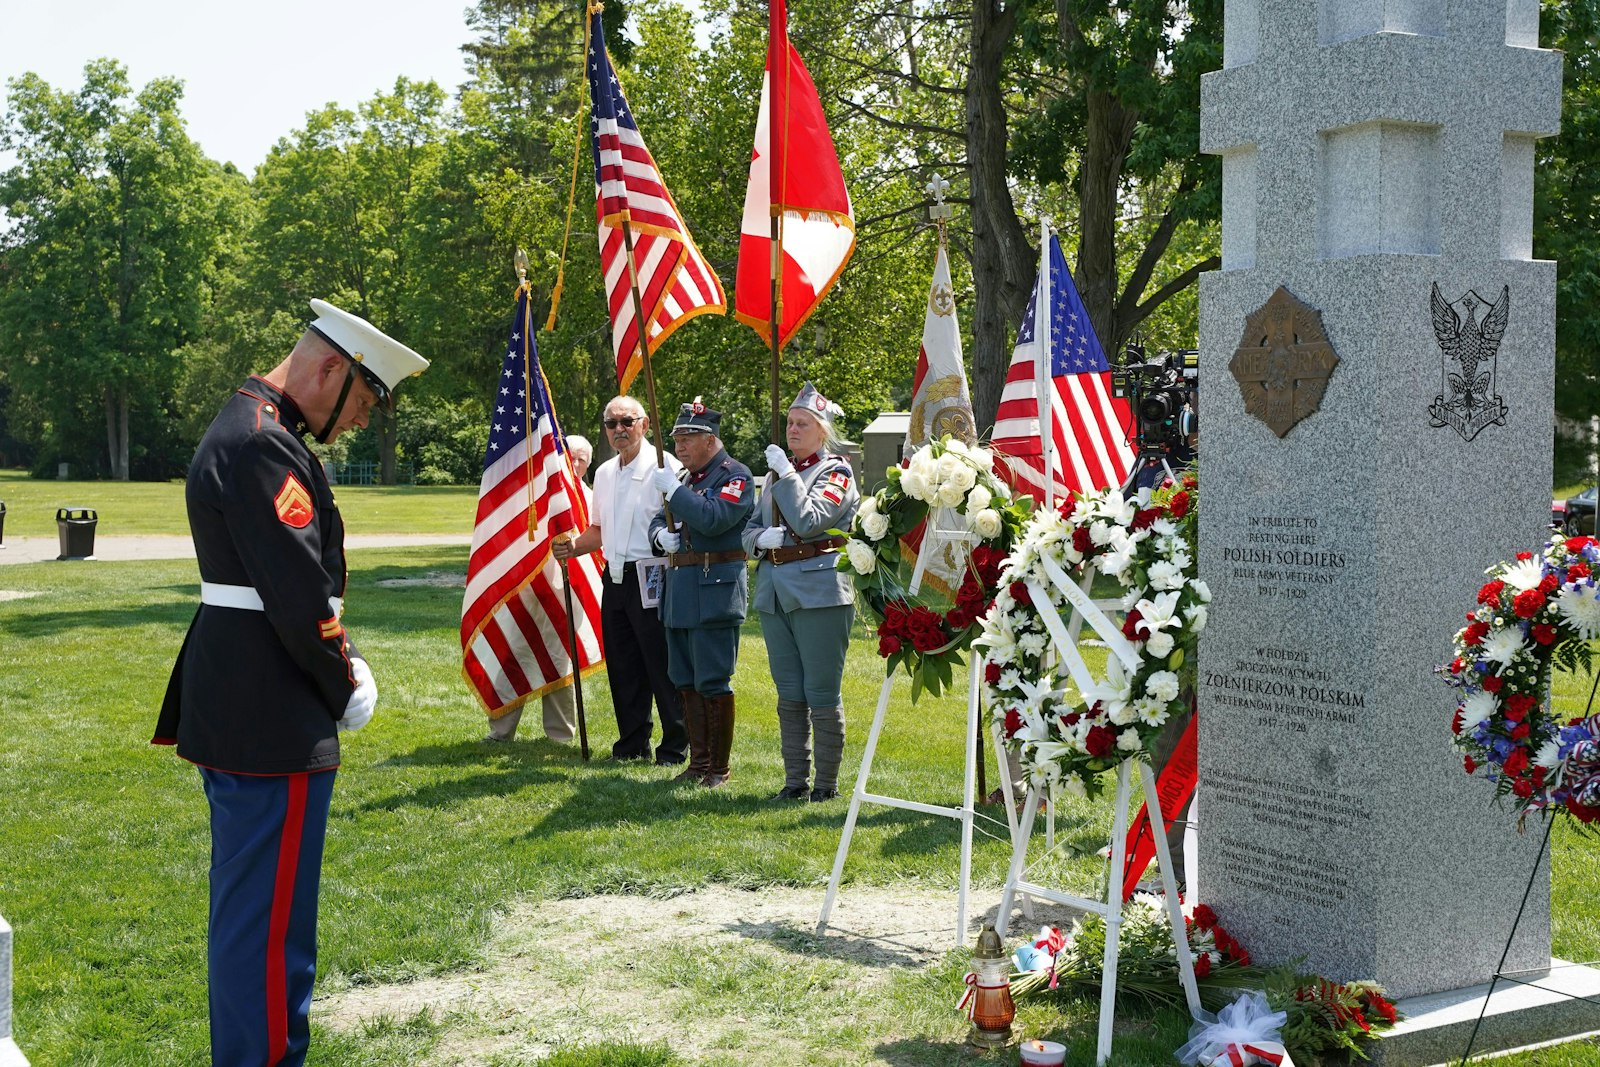 A Marine bows his head in honor before a 6-foot-tall monument in Section 5 of the Holy Sepulchre Cemetery in Southfield commemorating Gen. Jozef Haller's "Blue Army," made up of Polish immigrants from North America, ethnic Poles who were prisoners of war from World War I's Central Powers and other members of Polish diaspora from around the world who fought for an independent Poland from 1918-20.